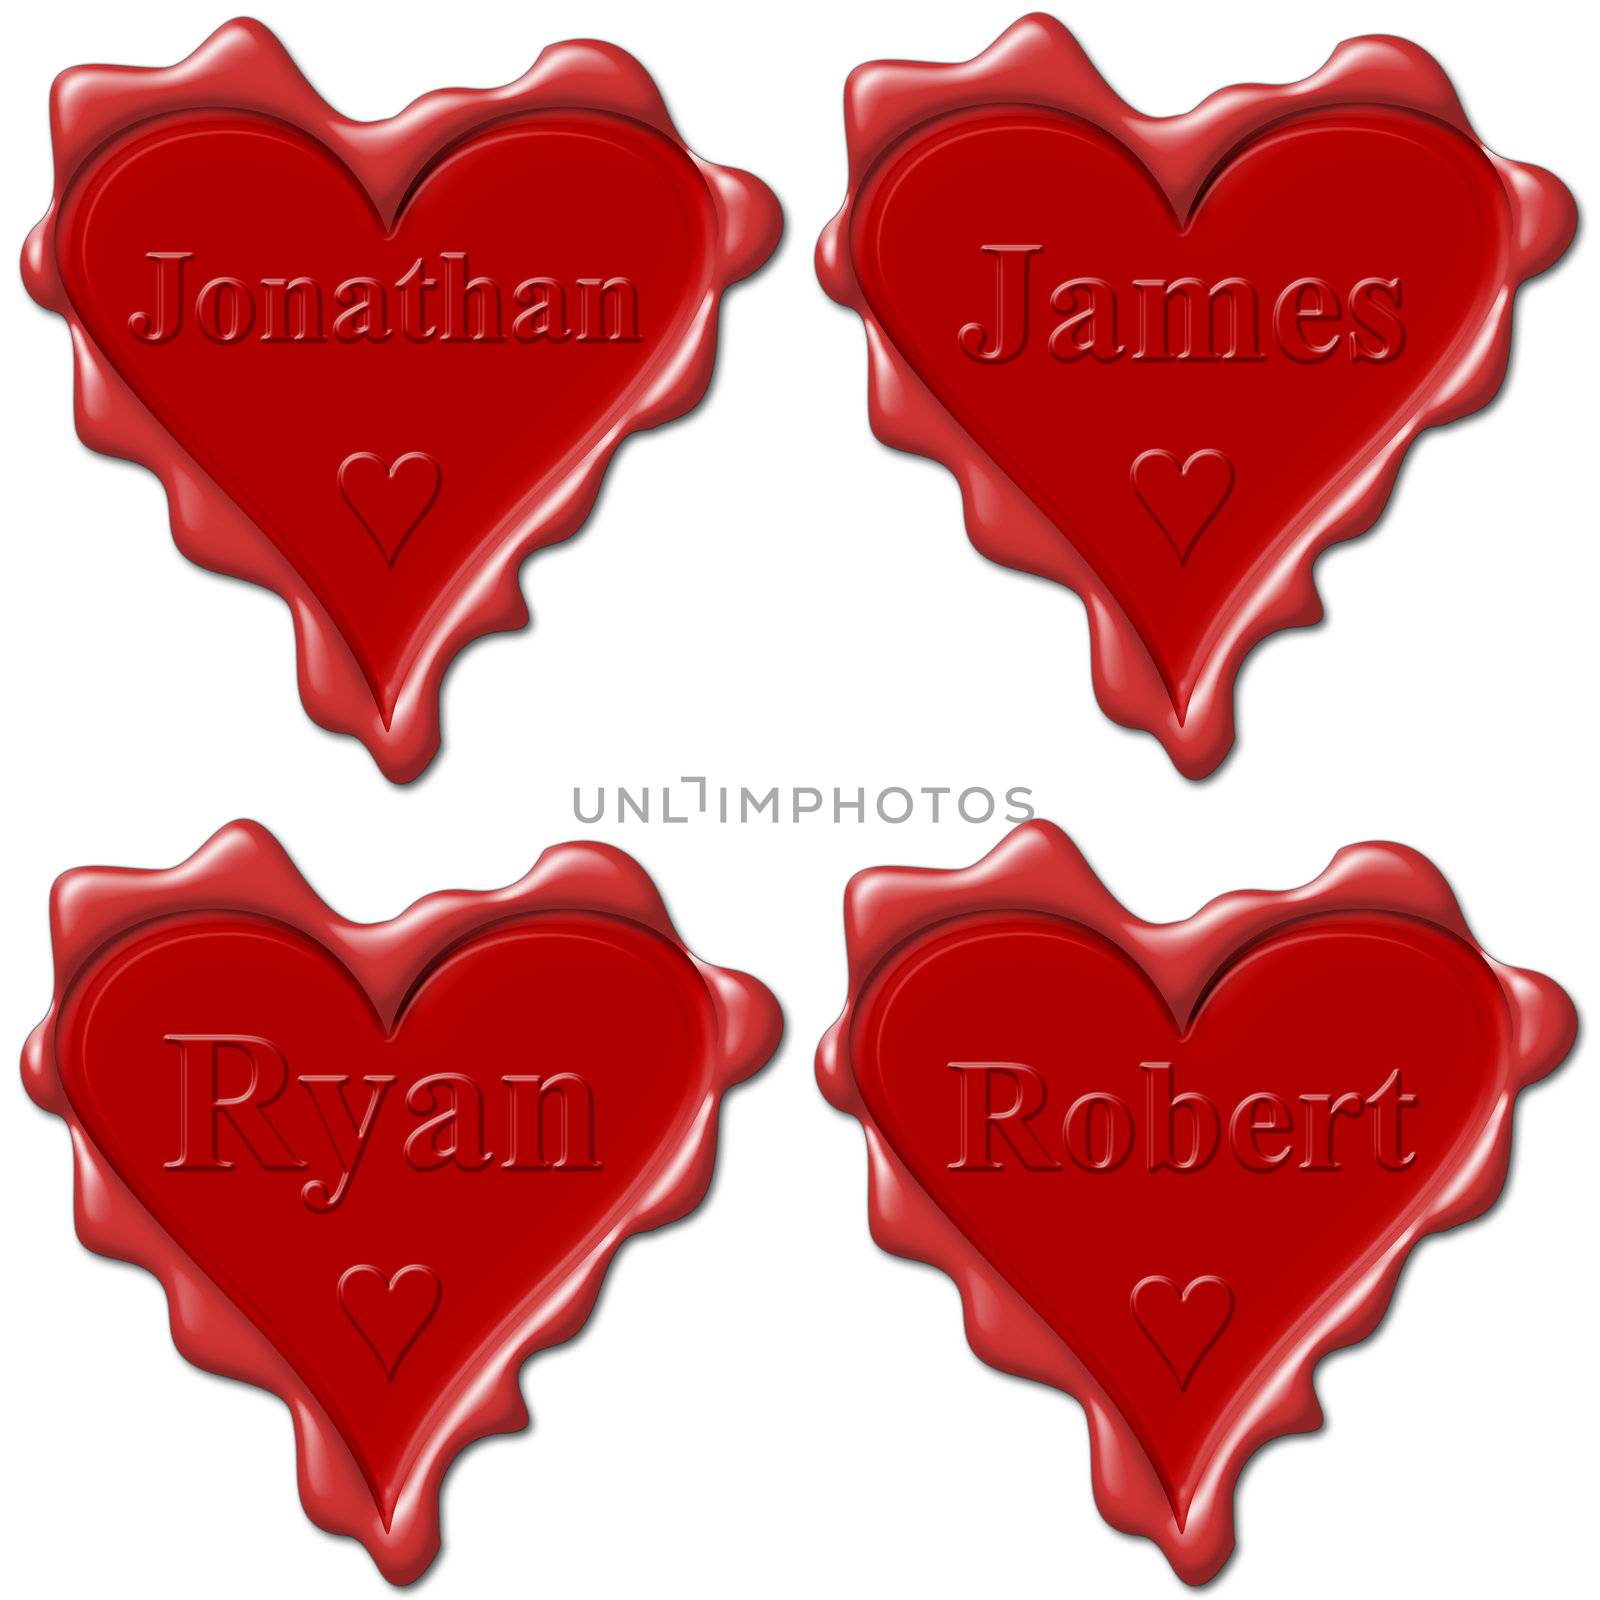 Valentine love hearts with names: Jonathan, James, Ryan, Robert by mozzyb